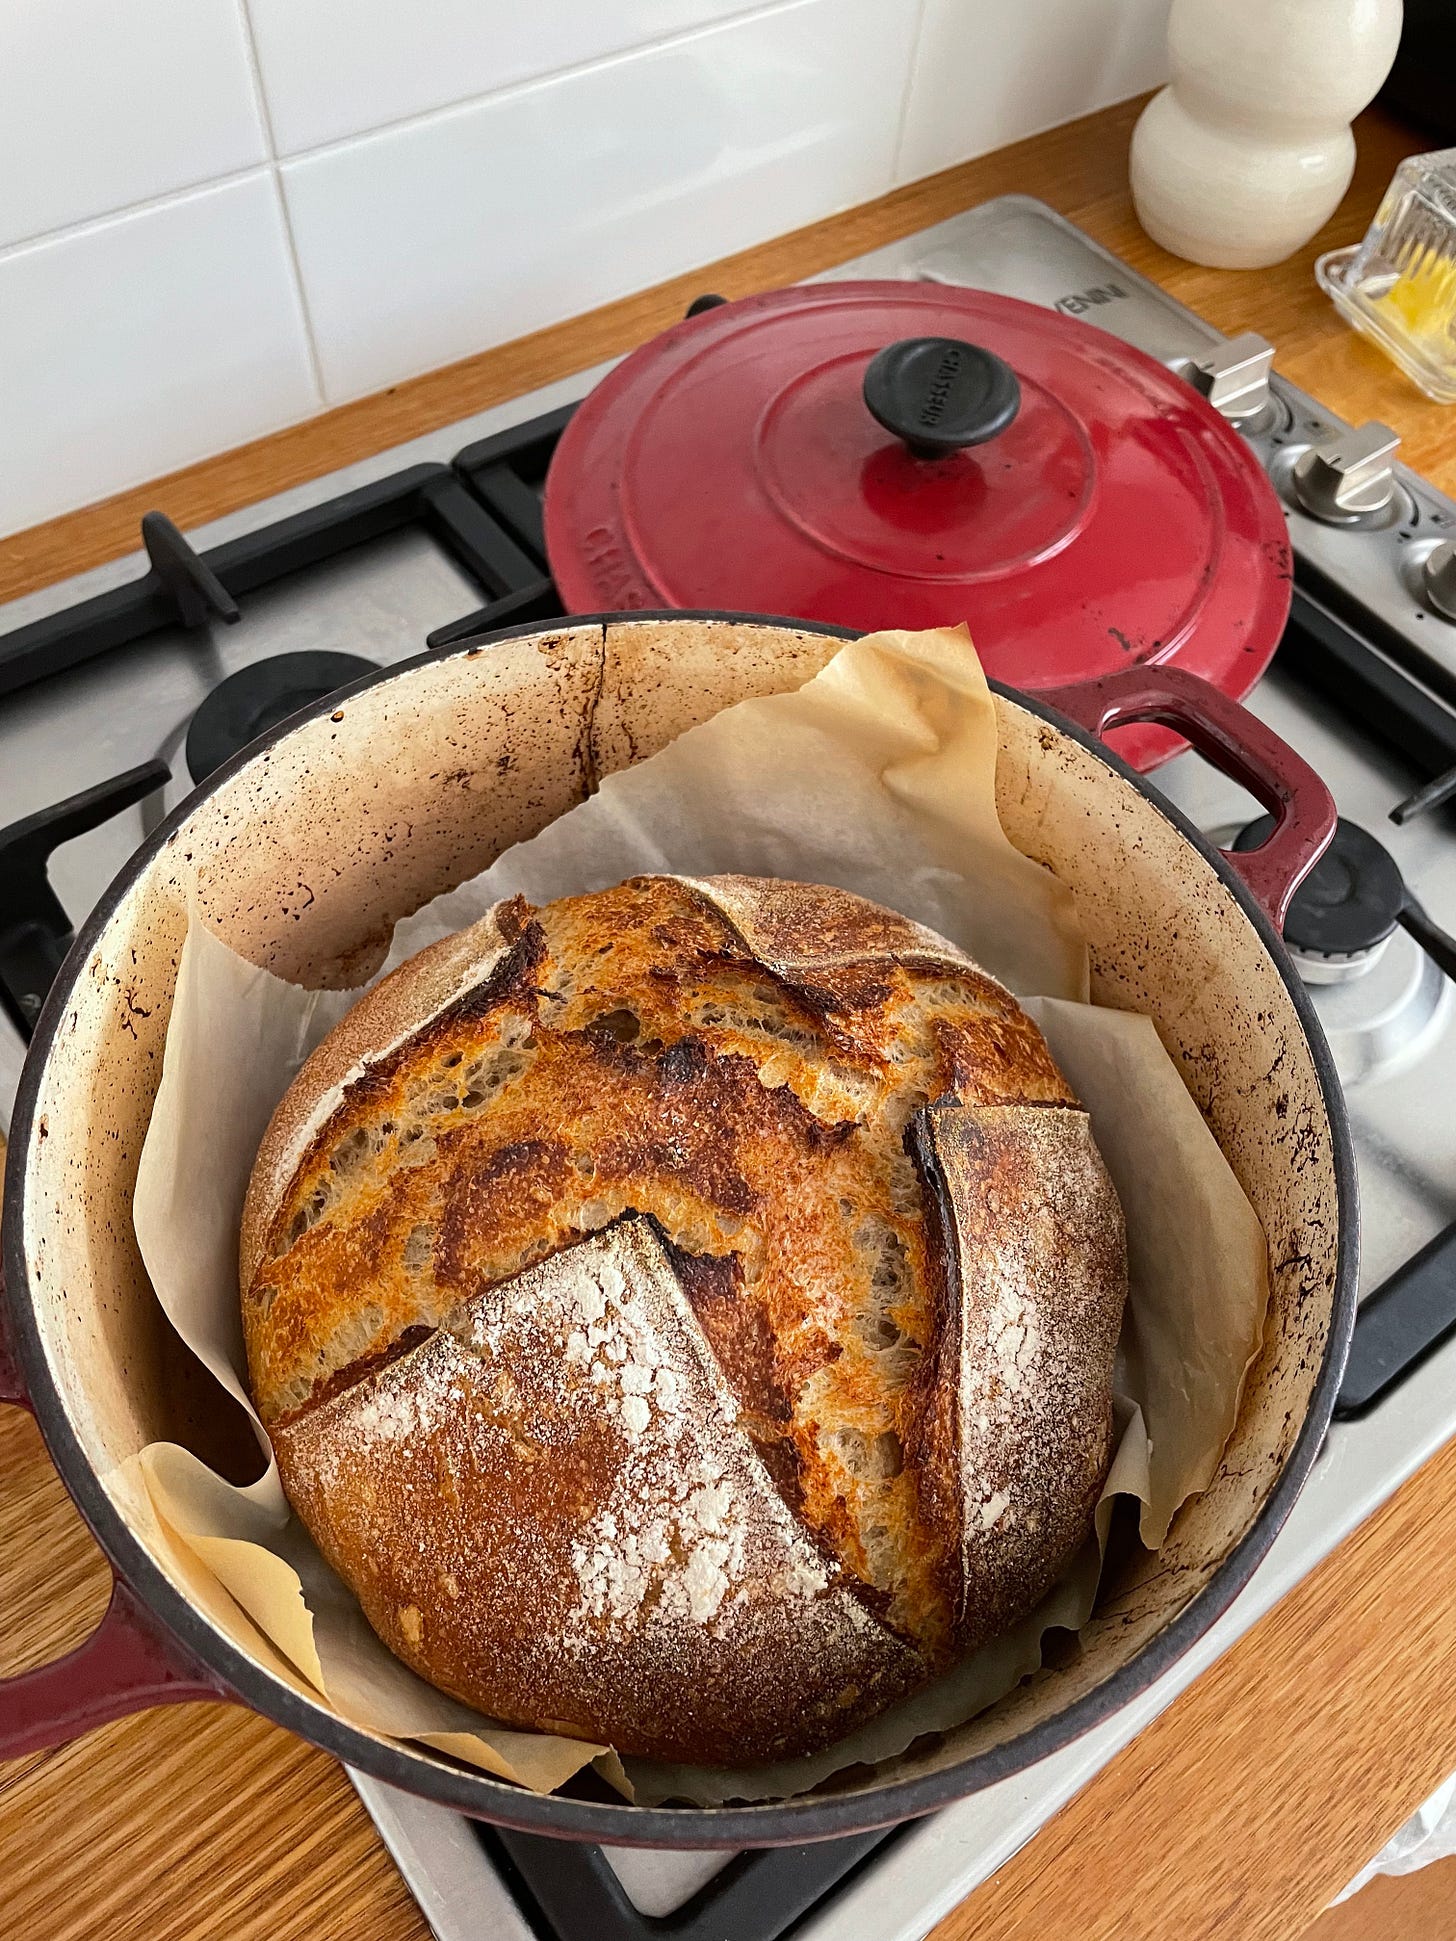 A sourdough loaf just baked instead a red dutch oven.